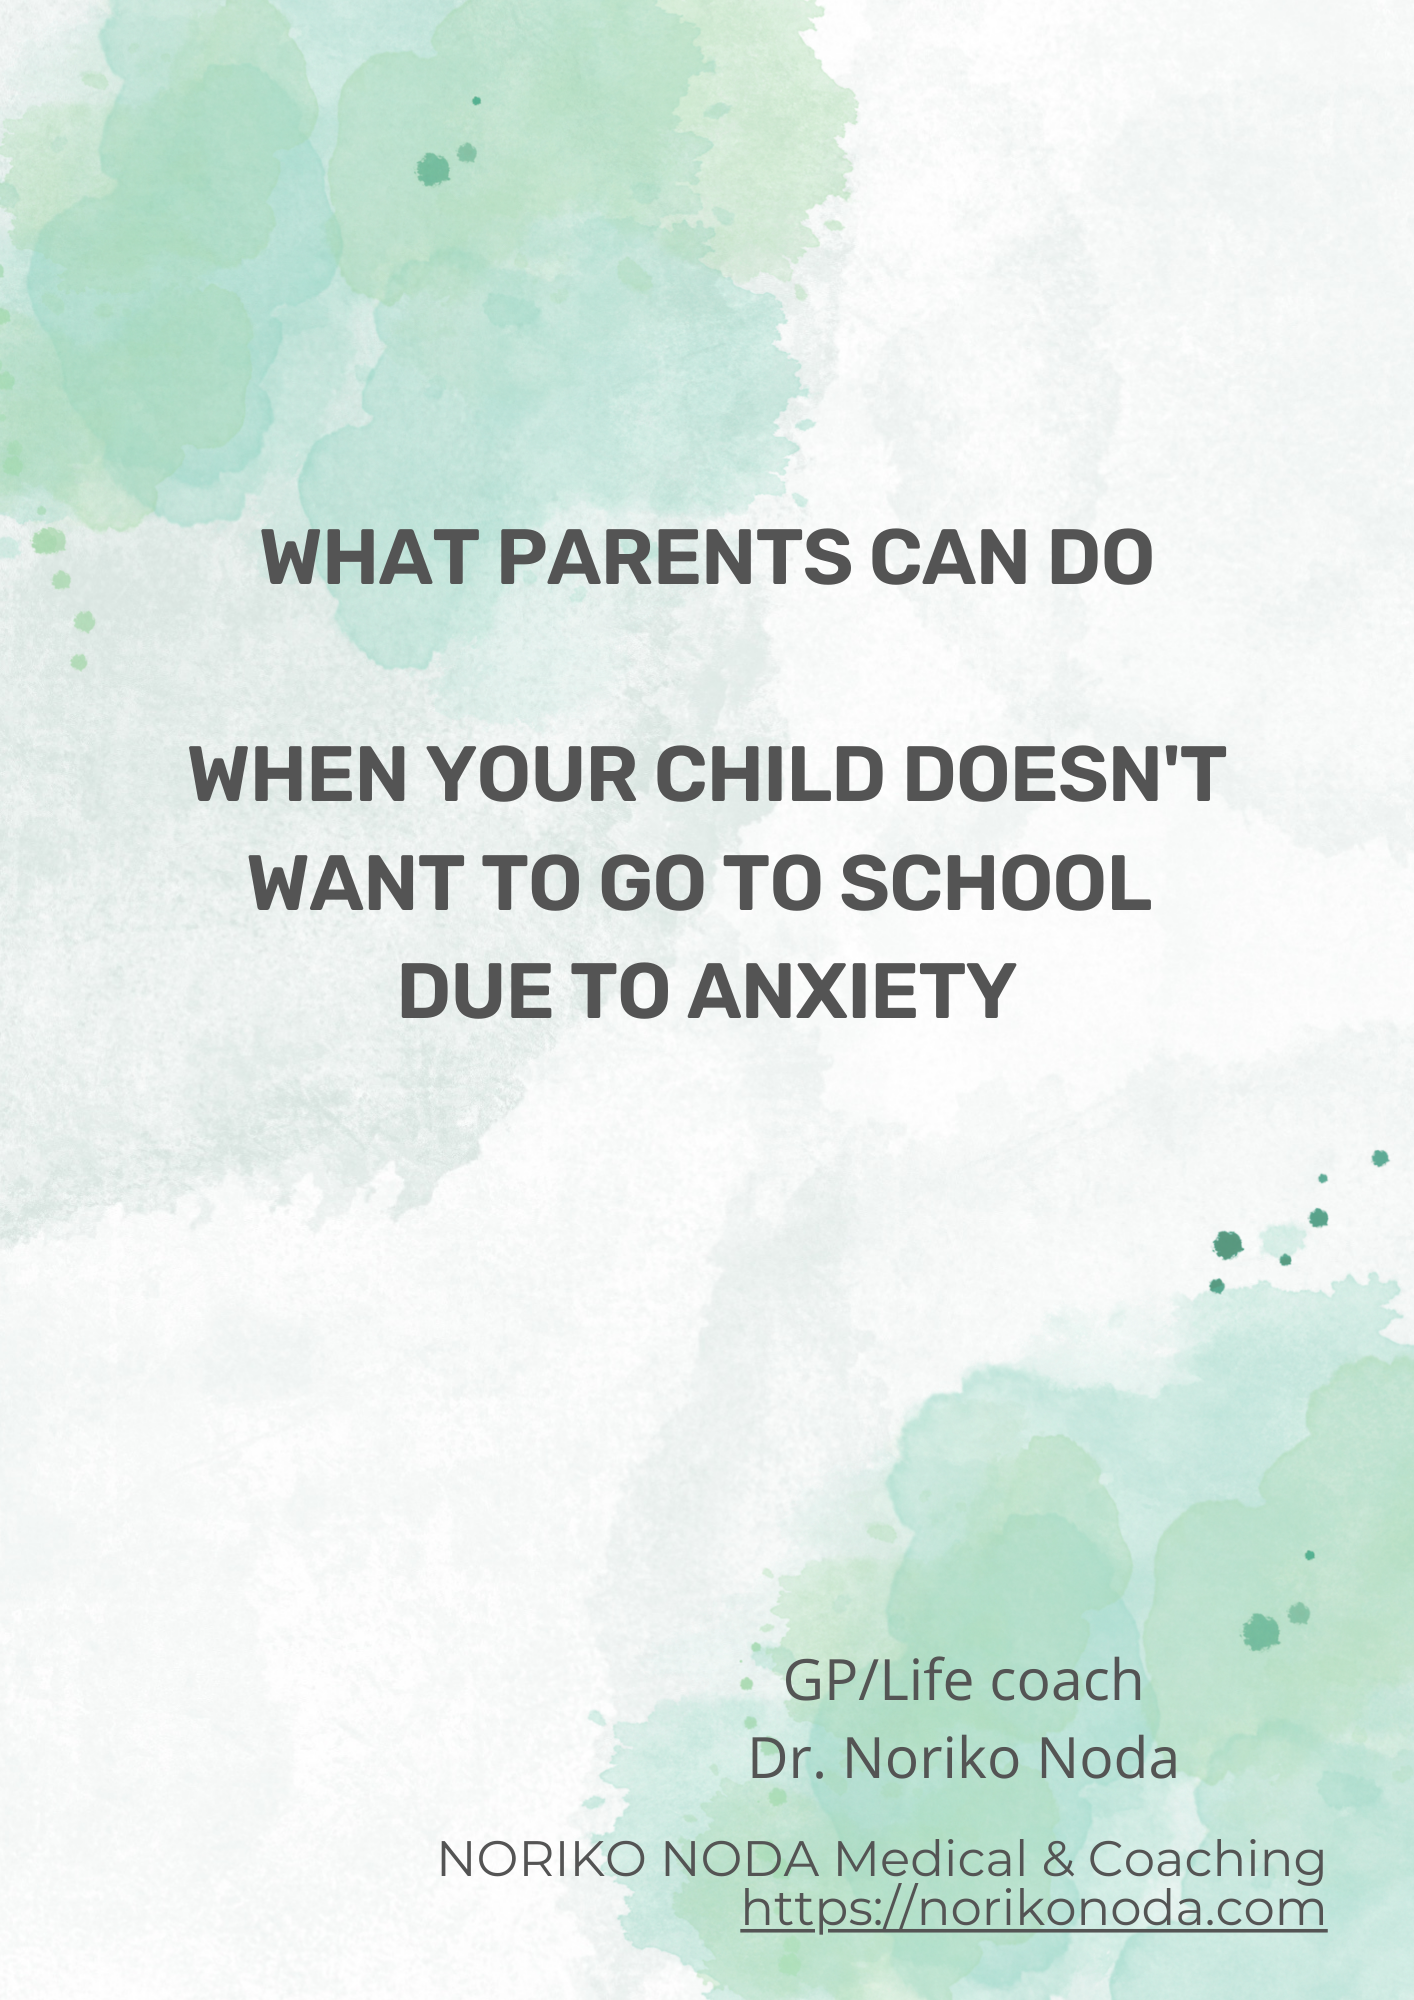 What parents can do when the child refuses to go to school